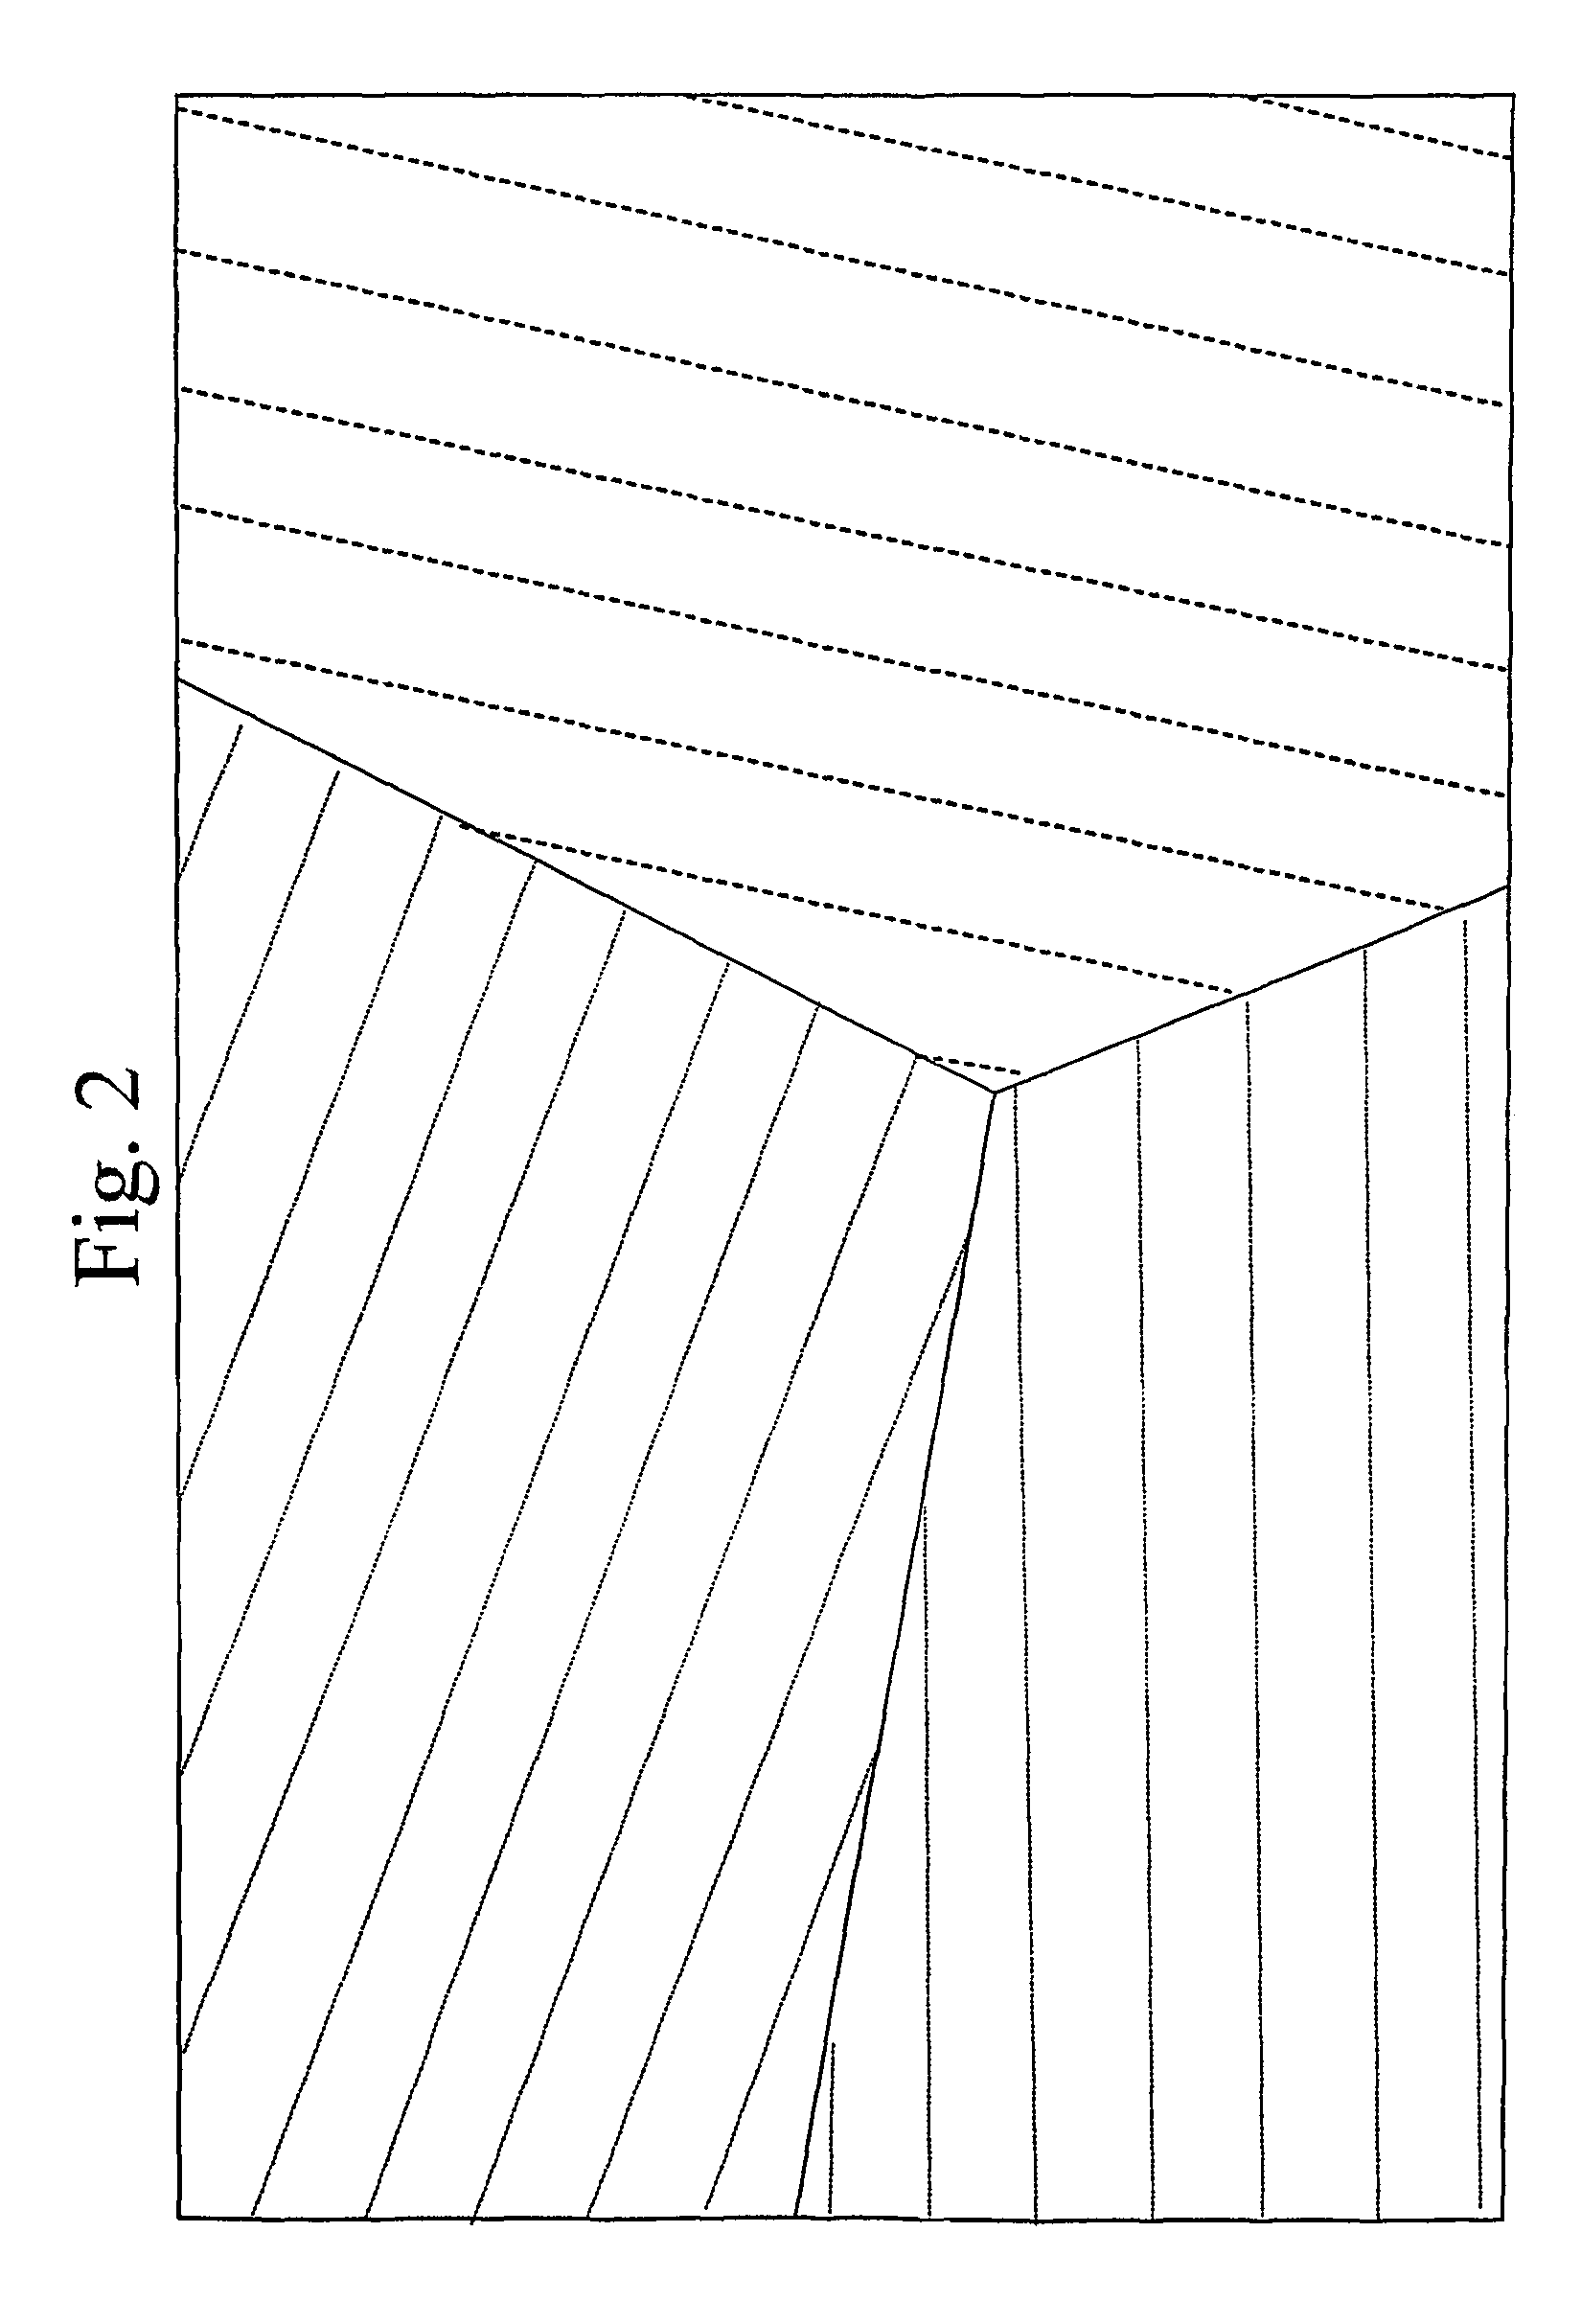 Method for fabricating a long-range ordered periodic array of nano-features, and articles comprising same